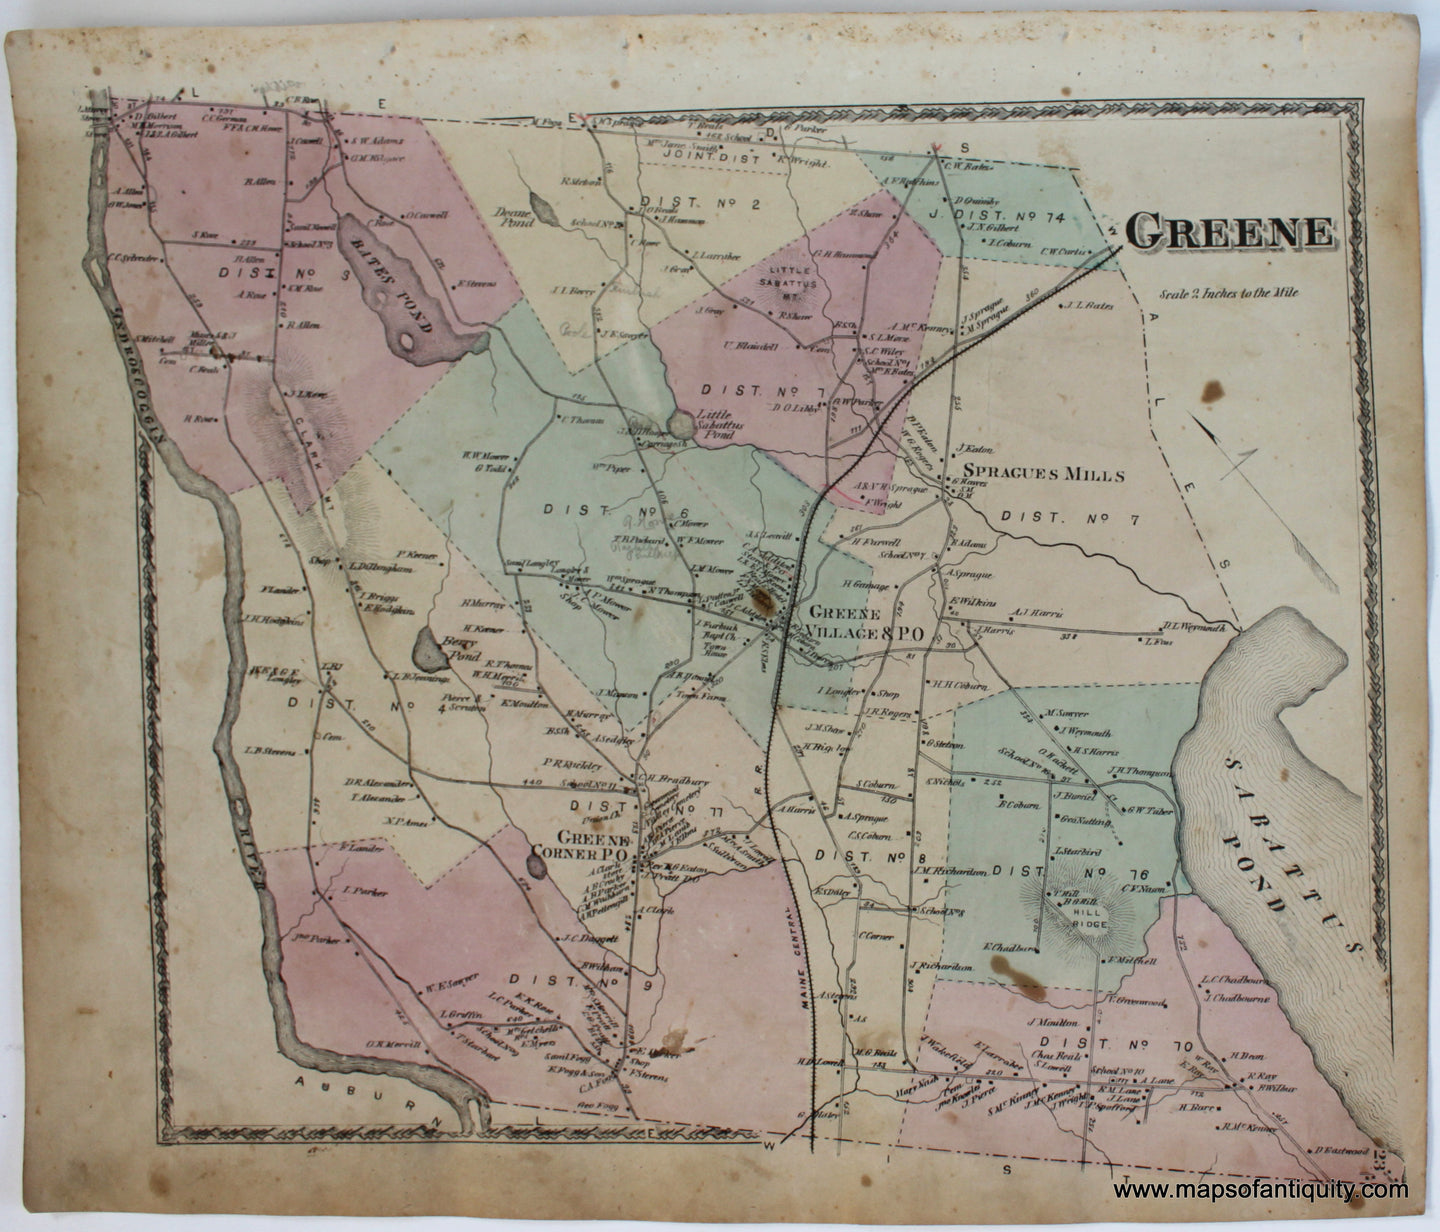 Antique-Map-Greene-Androscoggin-Co.-County-Maine-Town-Towns-Sanford-Everts-1873-1870s-1800s-Mid-Late-19th-Century-Maps-of-Antiquity